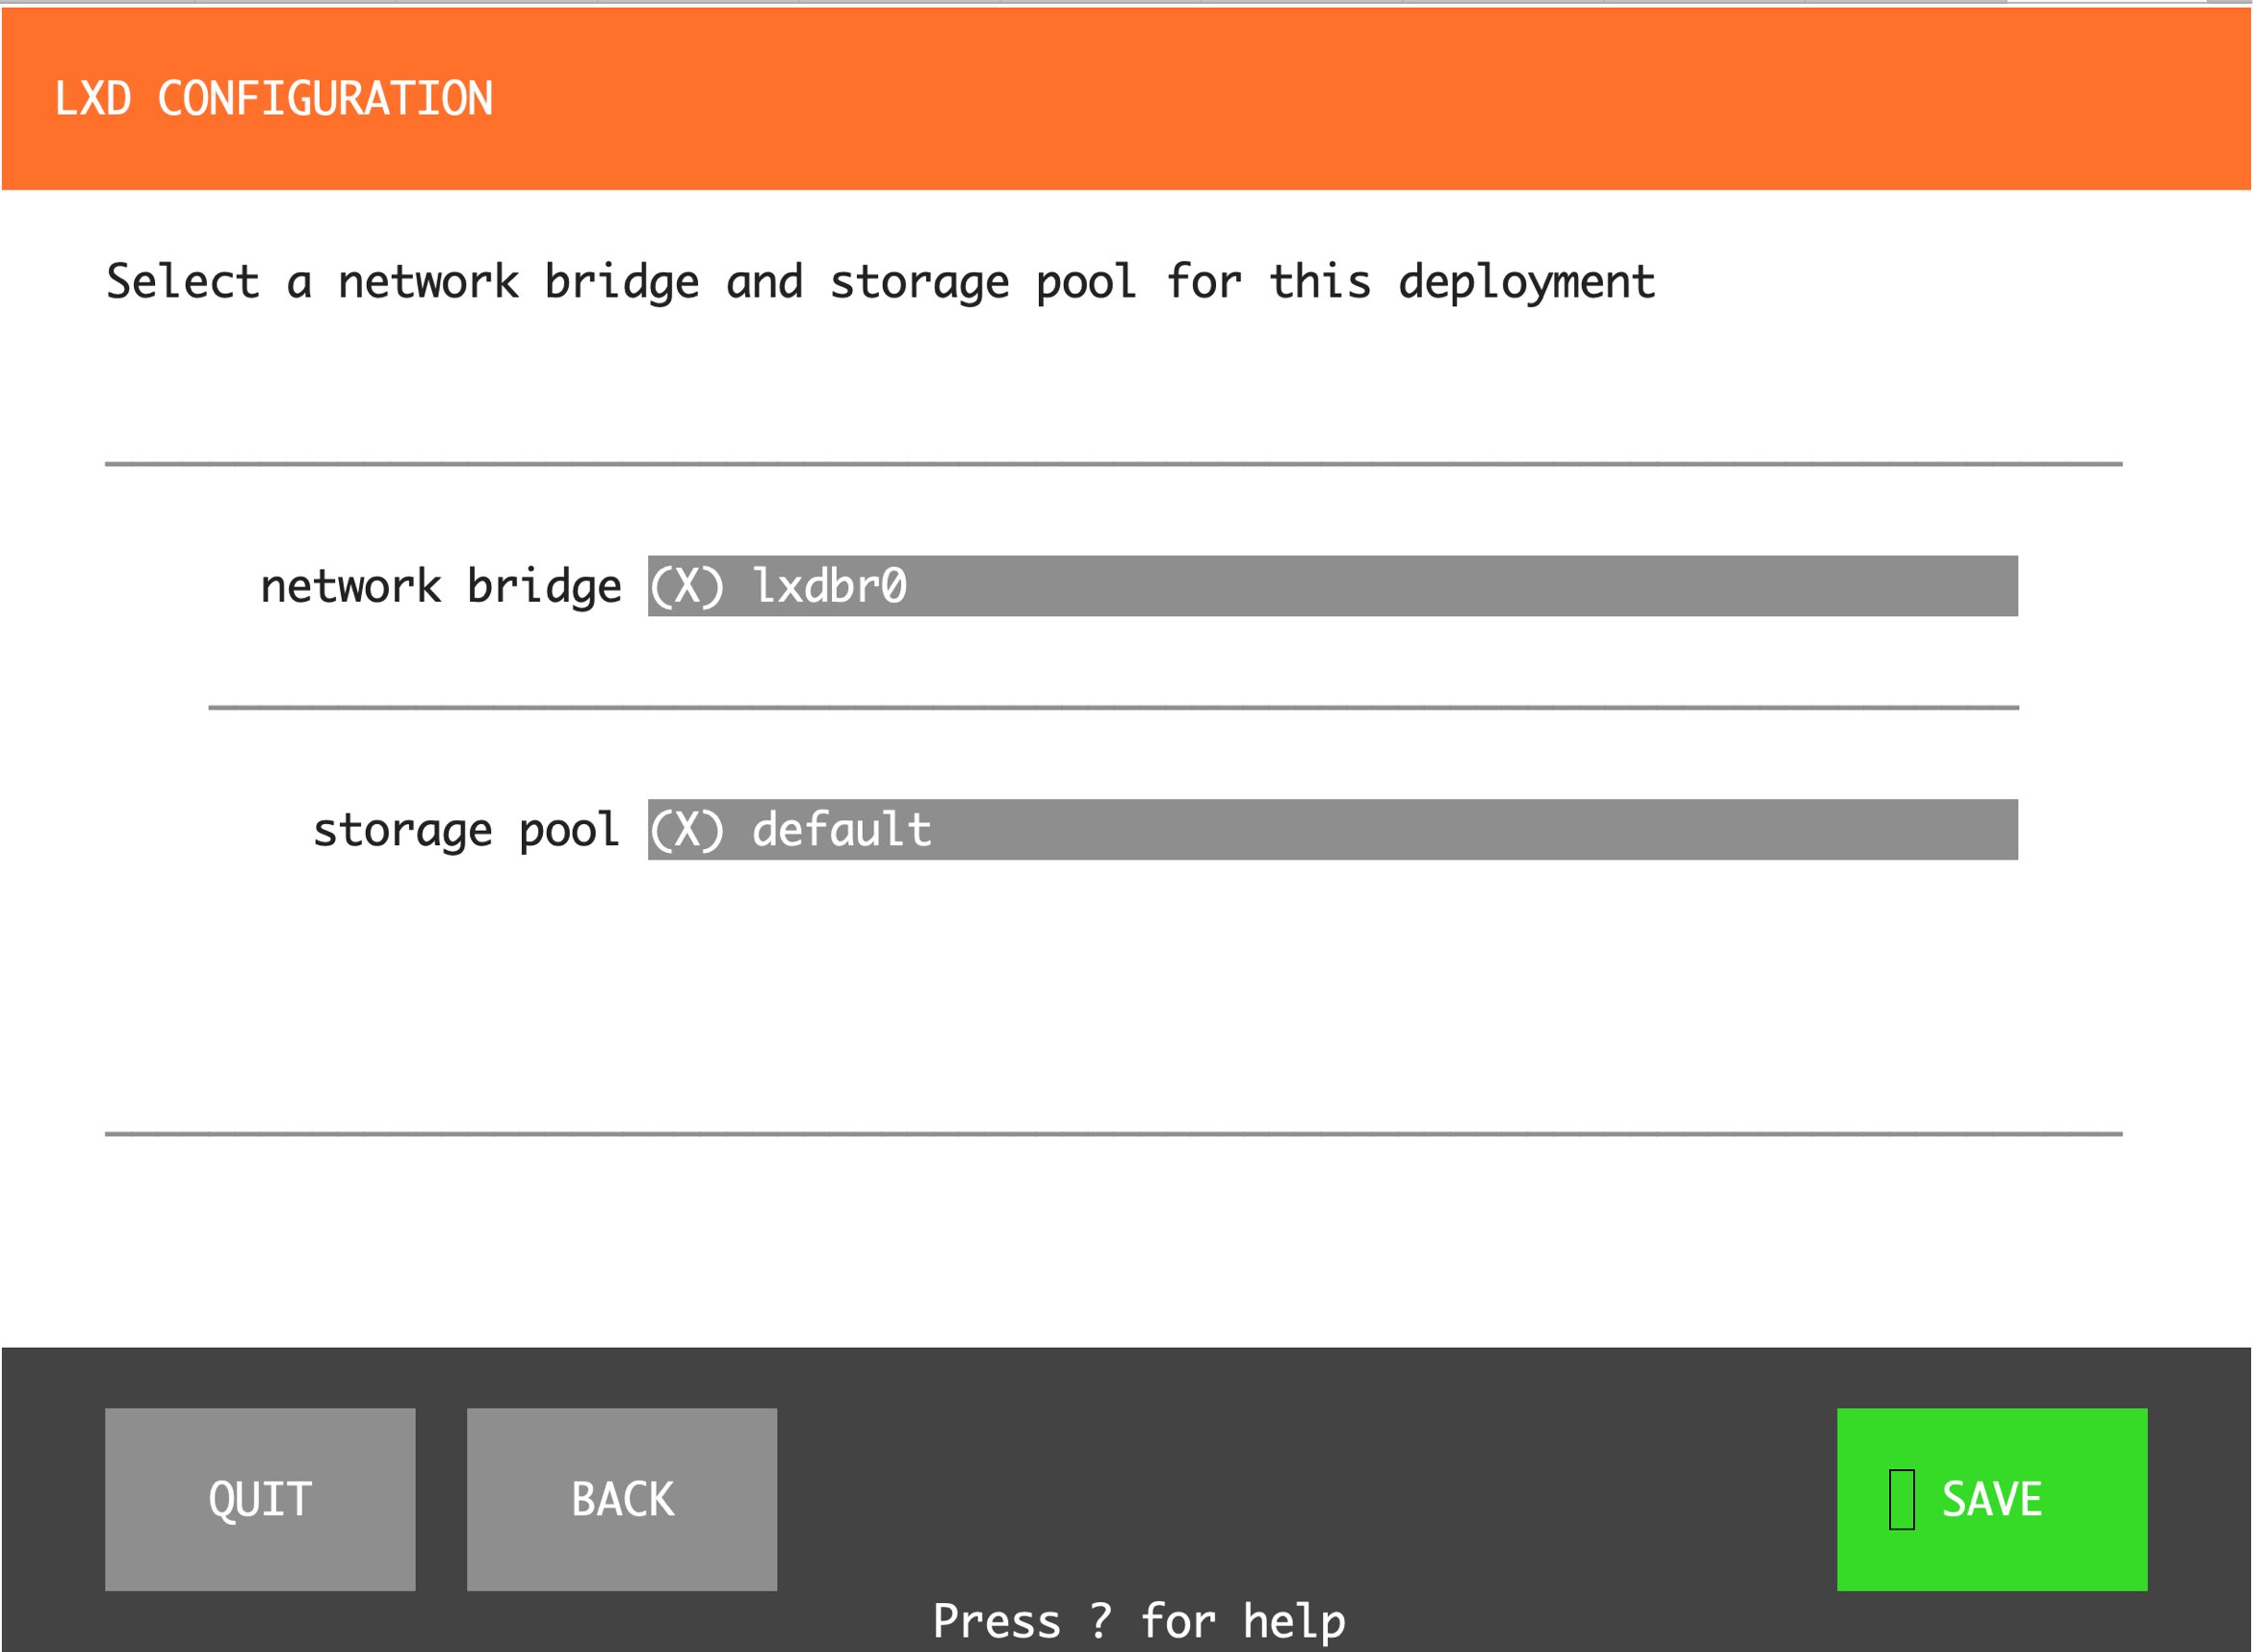 Select a network bridge and storage pool for this deployment